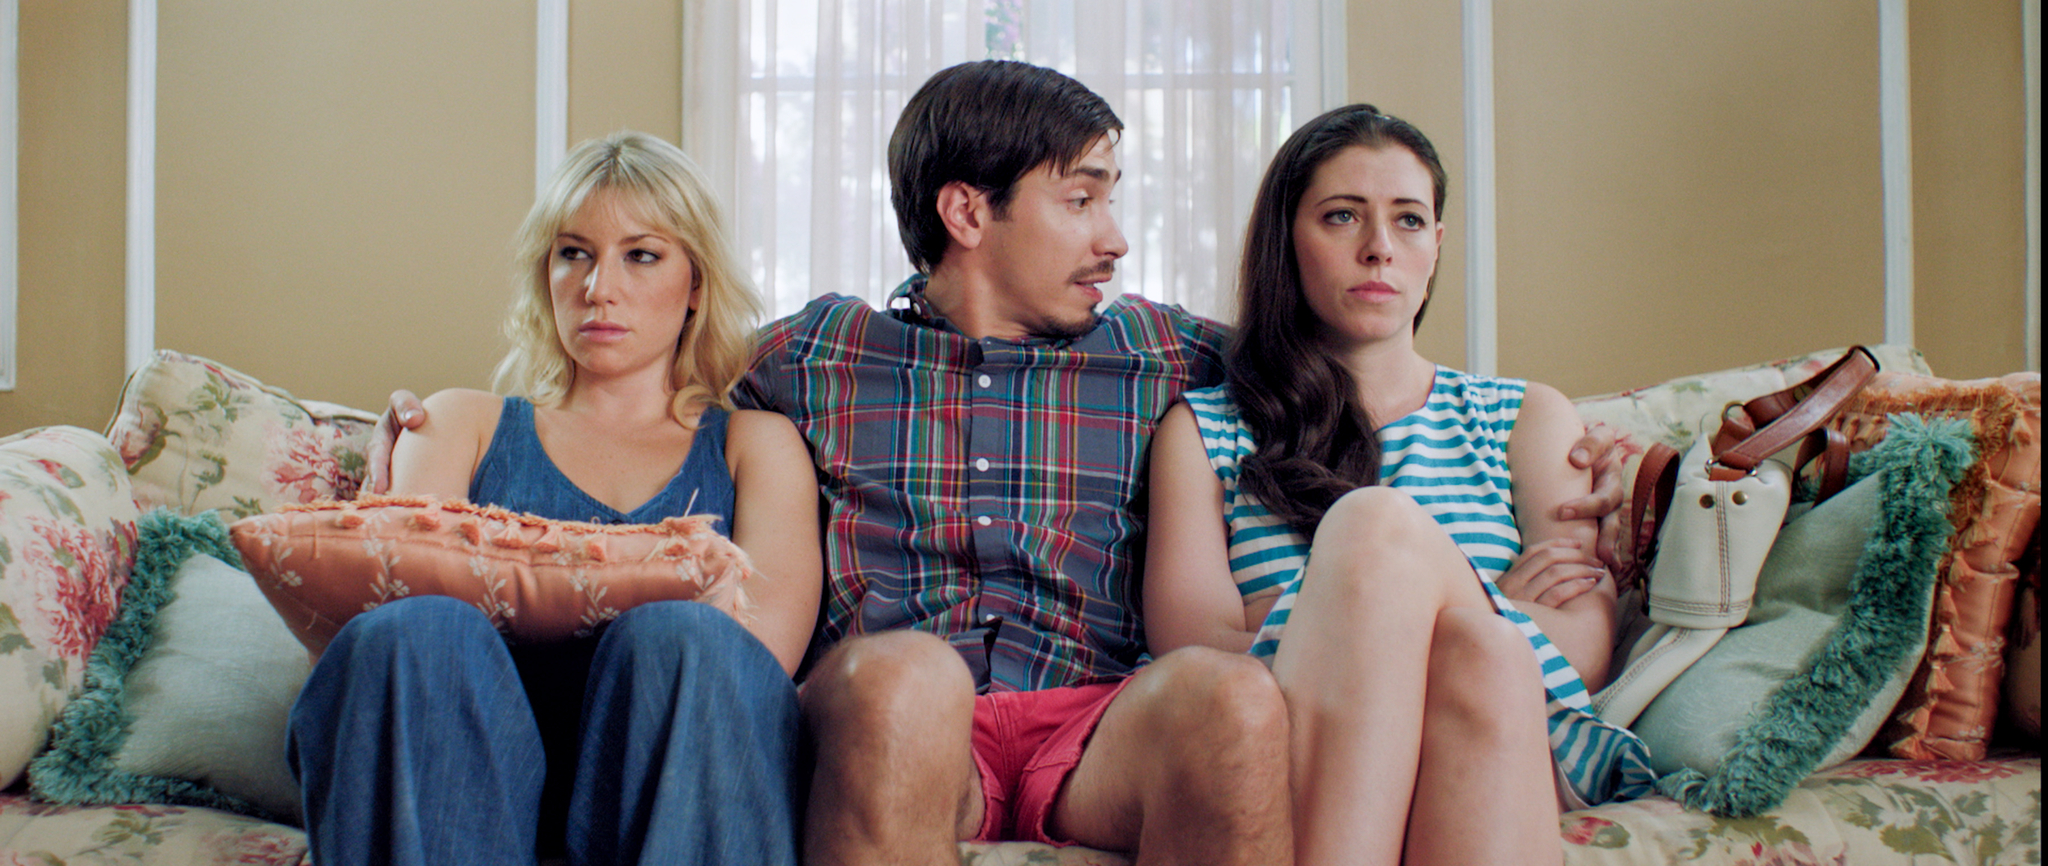 Still of Ari Graynor, Justin Long and Lauren Miller in For a Good Time, Call... (2012)